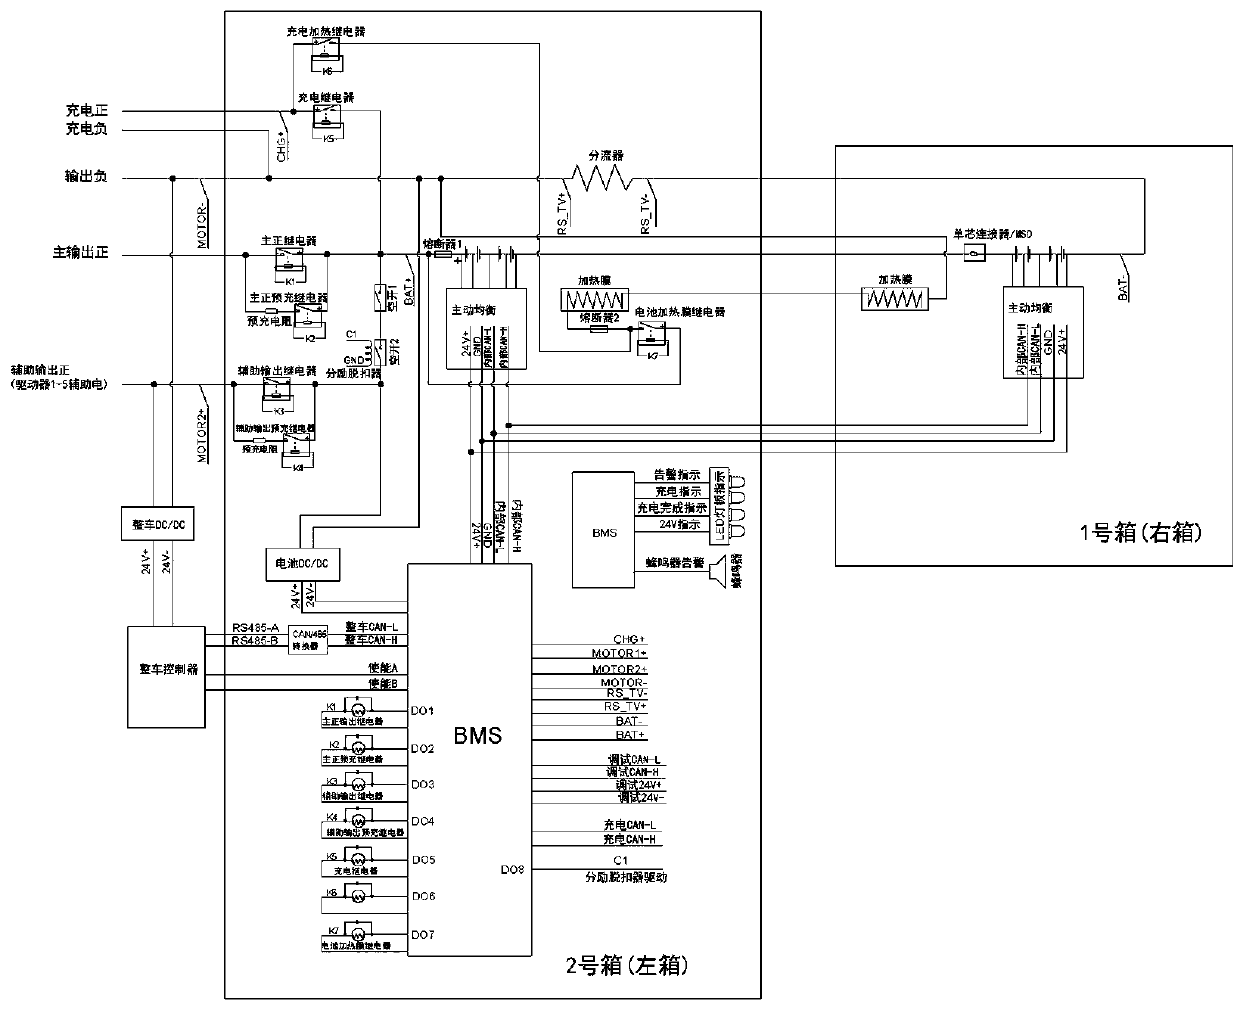 Electrical control system for lithium battery of special vehicle and working mode of system